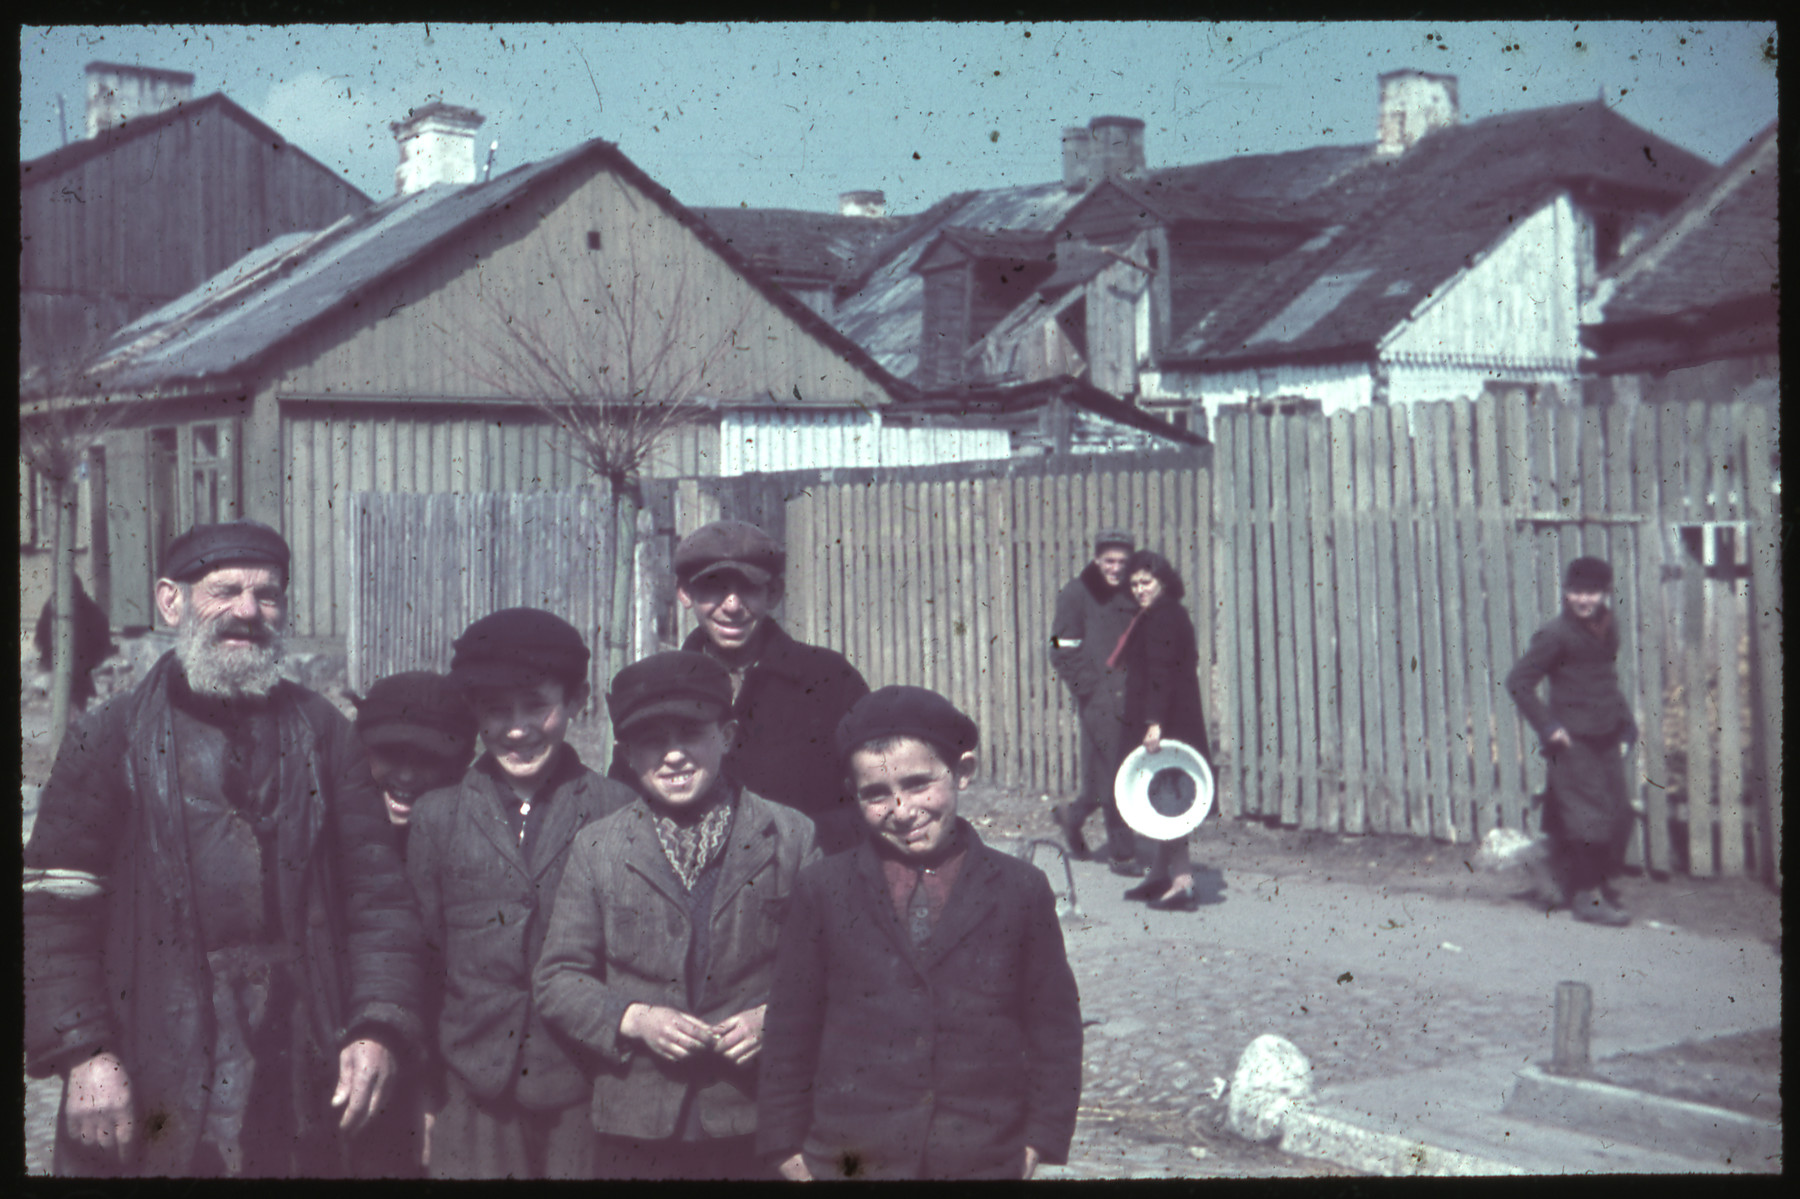 Group portrait of Jewish boys and an elderly man gathered together on a street.